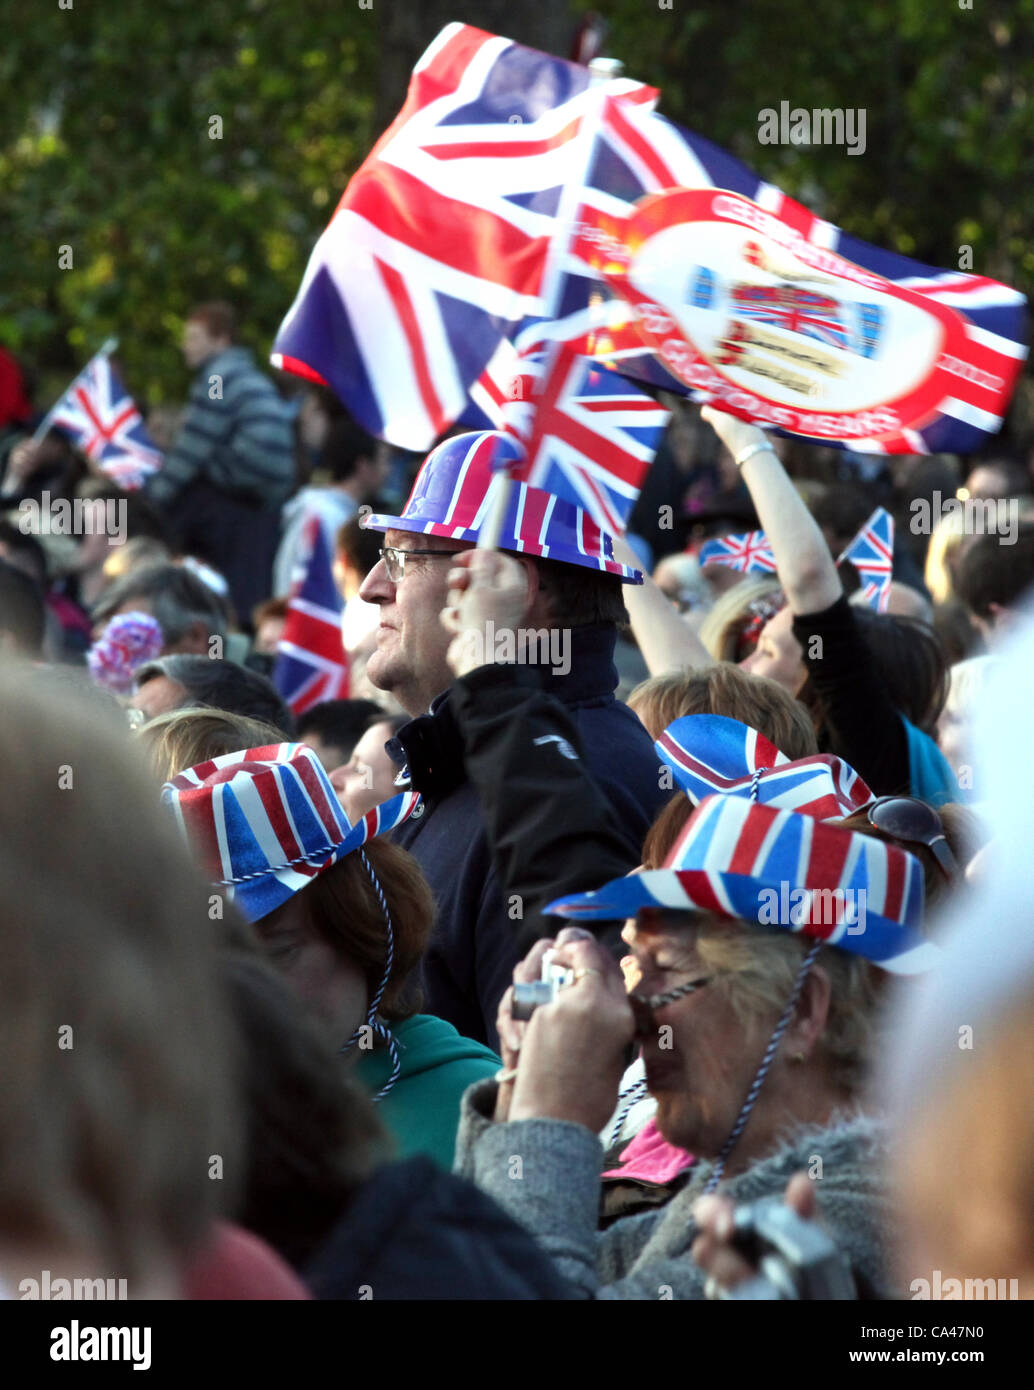 London, UK. June 4, 2012. Patriotic fans enjoy the Concert to celebrate The Queen's Diamond Jubilee on the big screens in St. james's Park, with Union Jack flags and hats. Stock Photo